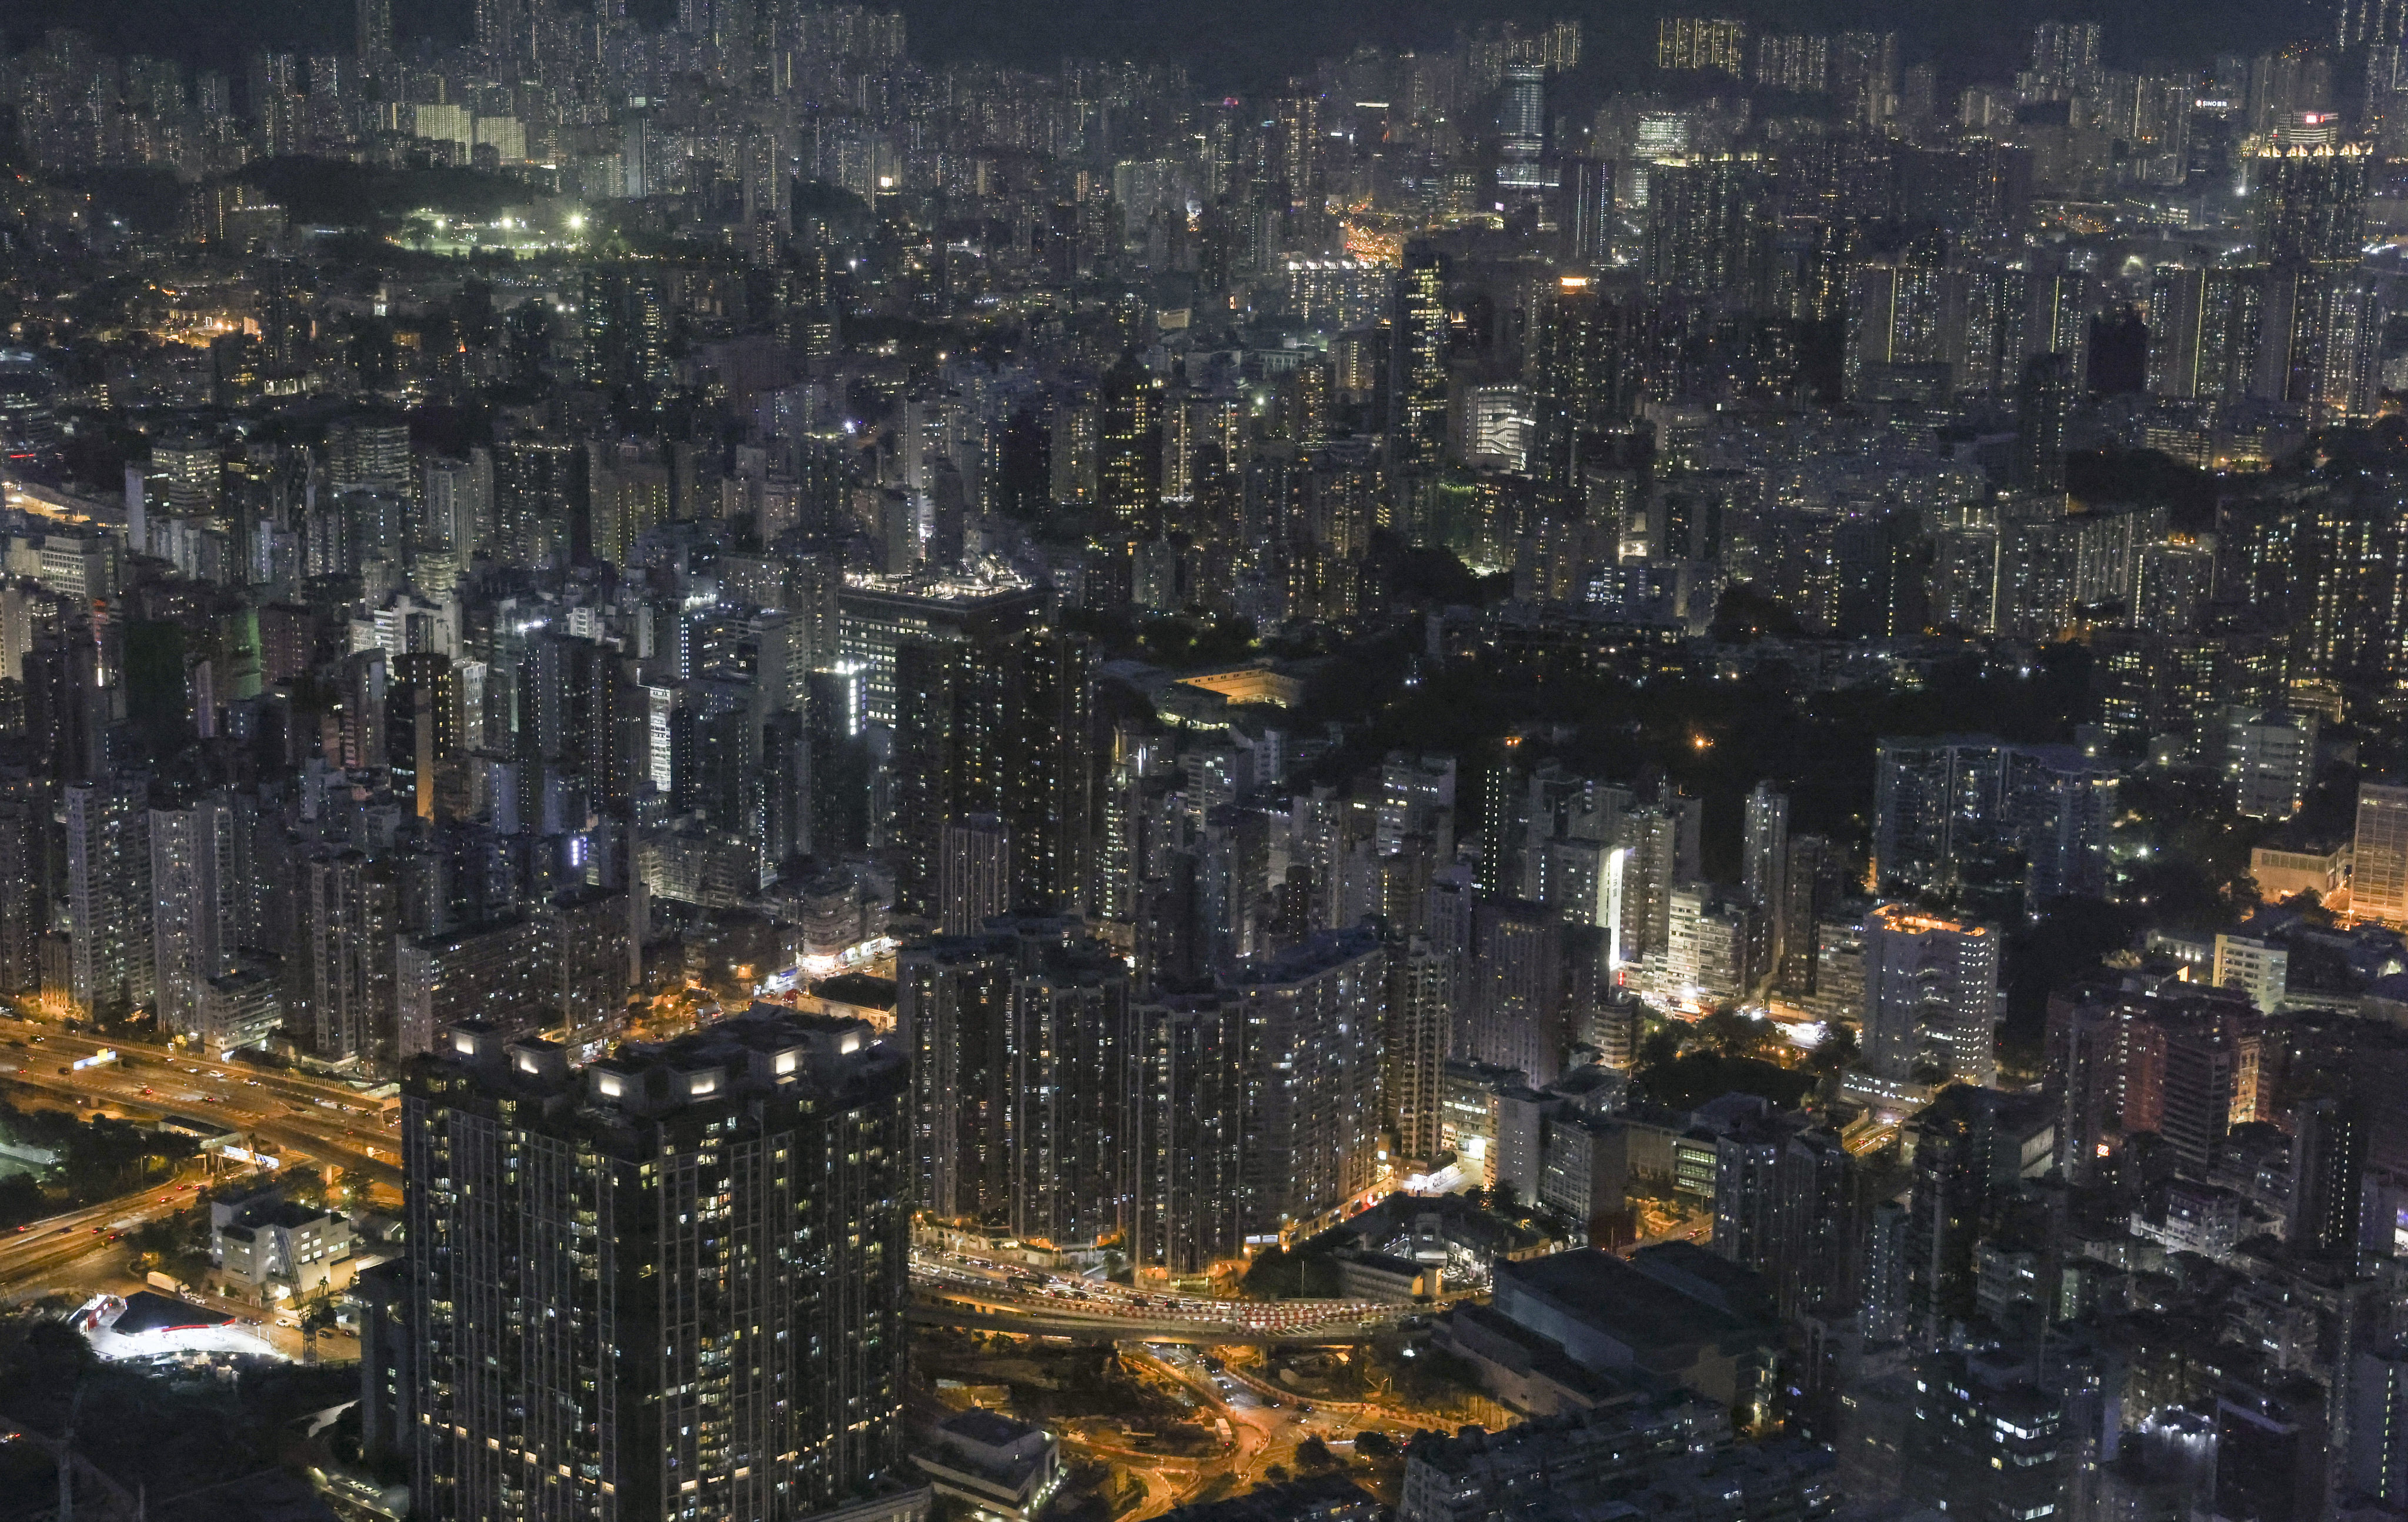 A night view of Kowloon taken from sky100 Hong Kong Observation Deck in West Kowloon, Hong Kong, on May 22, 2023. Photo: May Tse